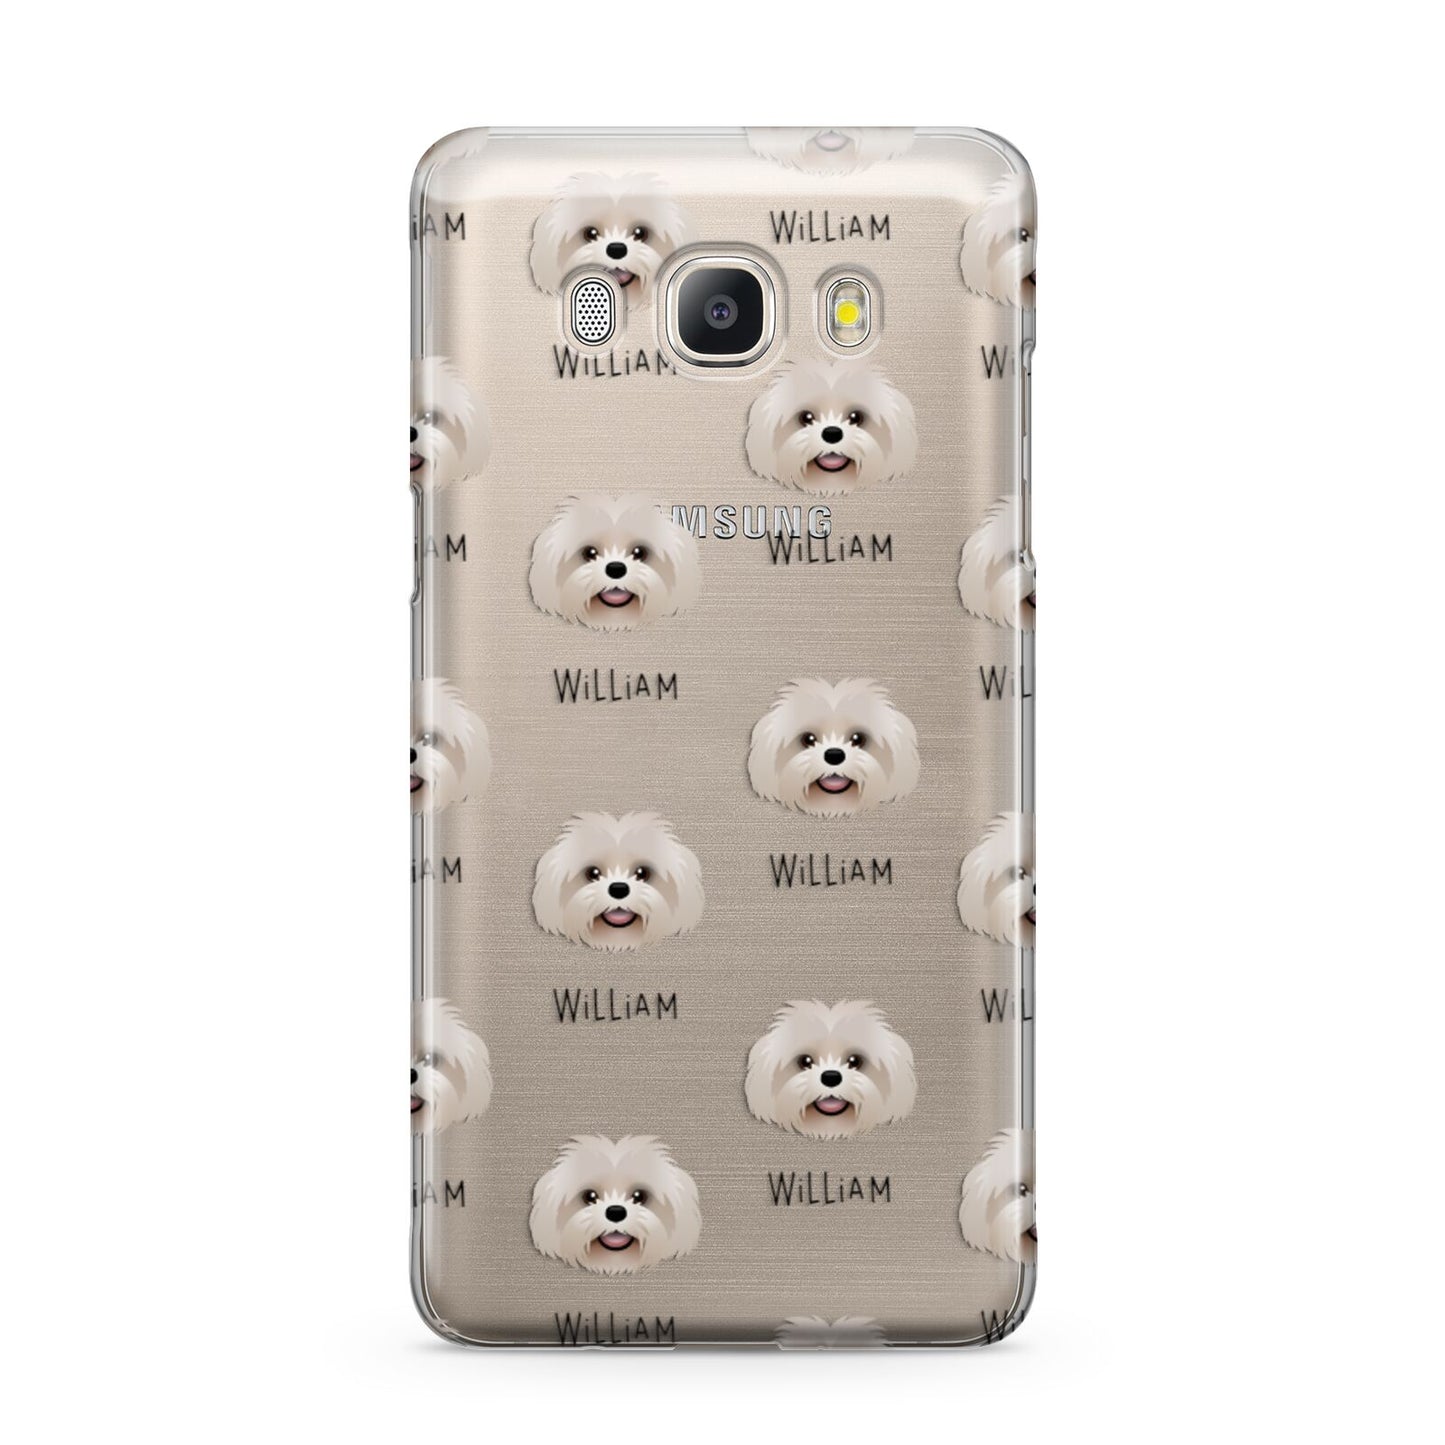 Shih Poo Icon with Name Samsung Galaxy J5 2016 Case